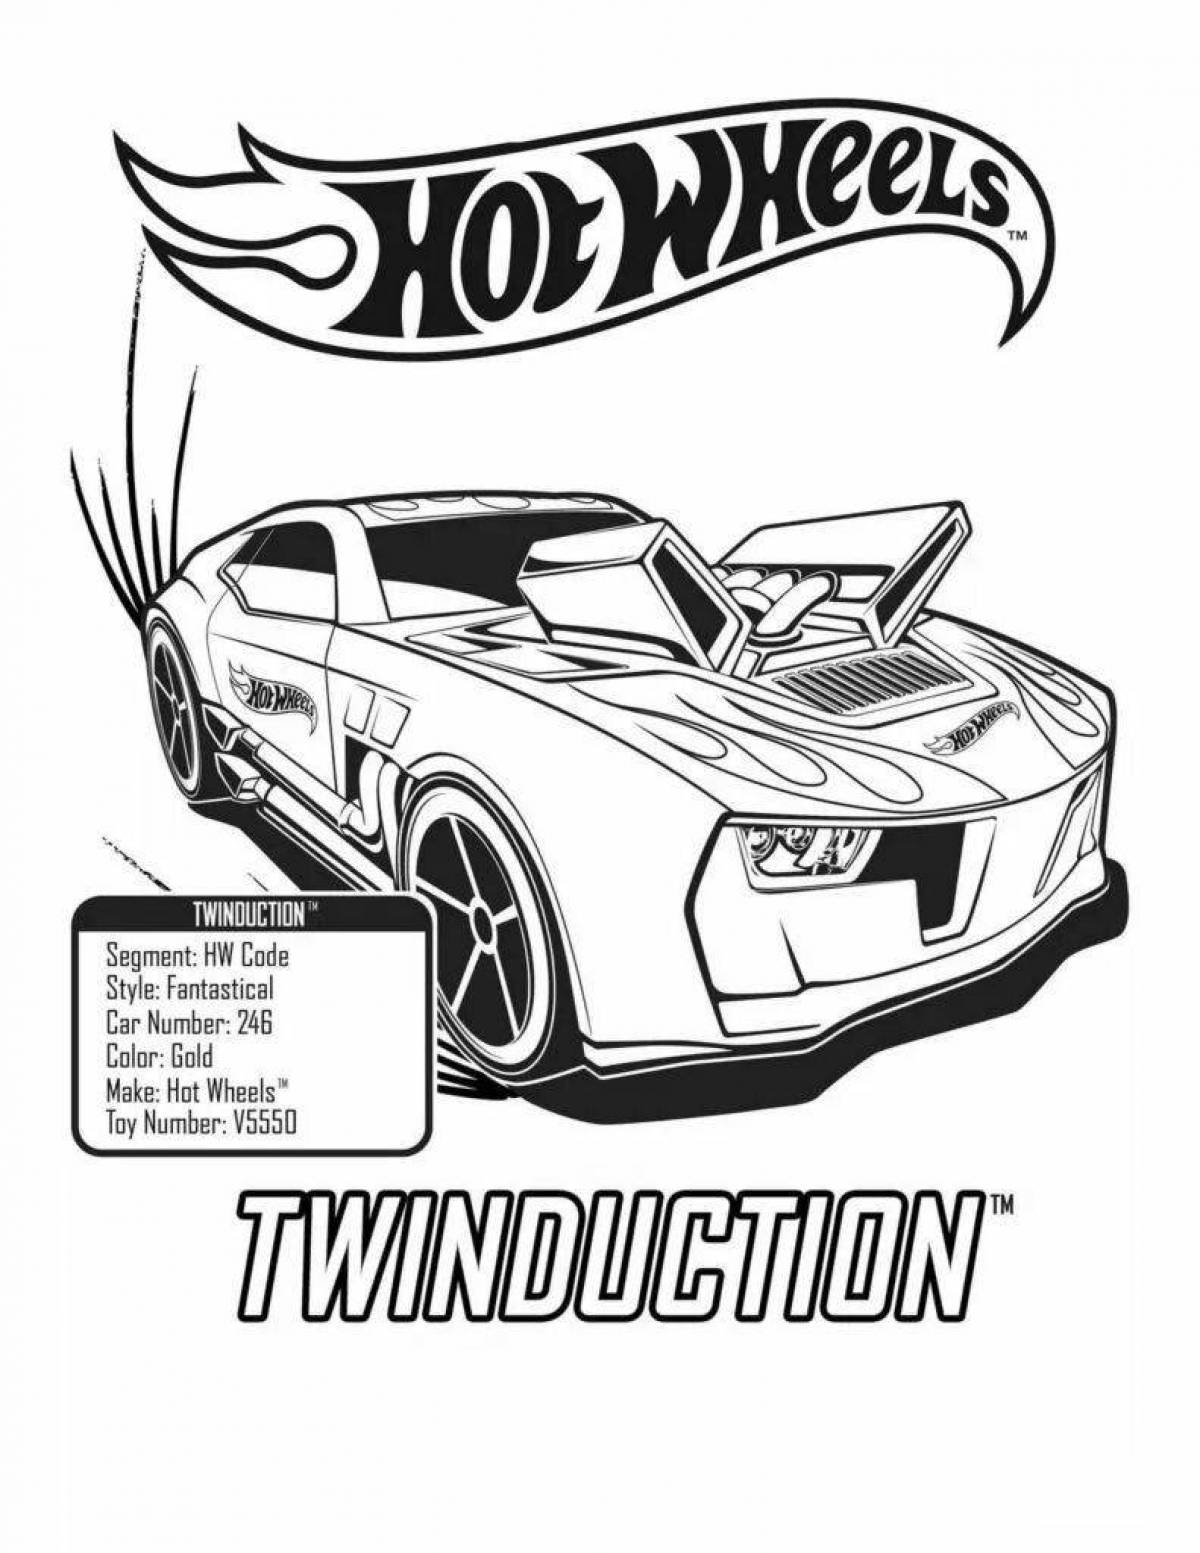 Intriguing hot wheels coloring page